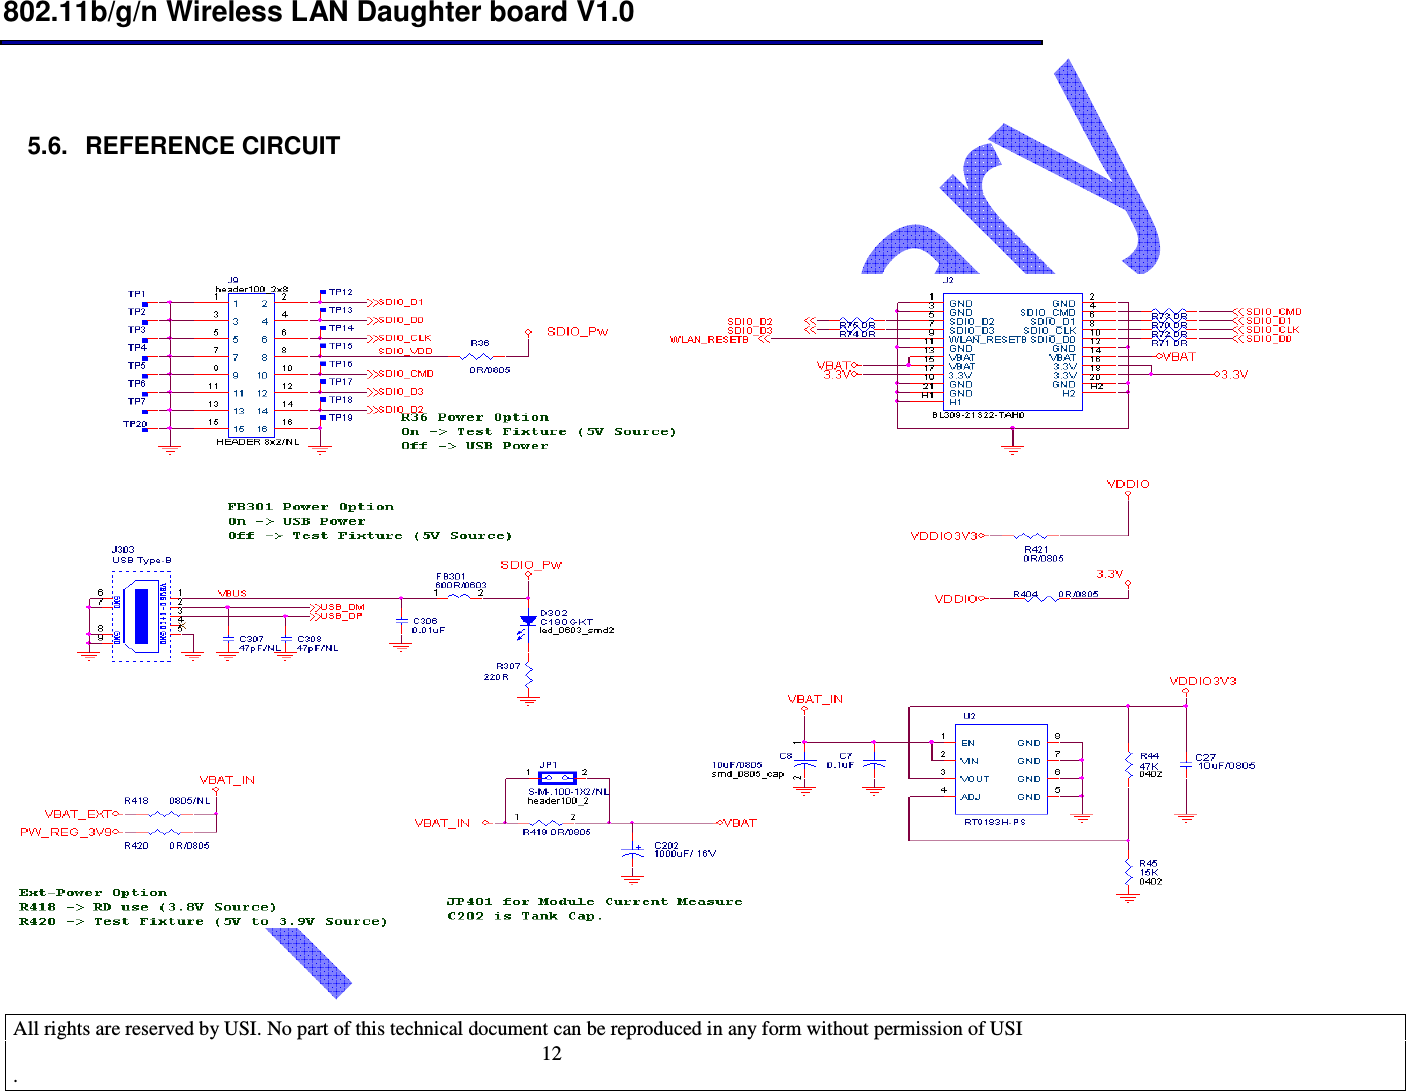  802.11b/g/n Wireless LAN Daughter board V1.0  All rights are reserved by USI. No part of this technical document can be reproduced in any form without permission of USI .                                    12 5.6.  REFERENCE CIRCUIT    